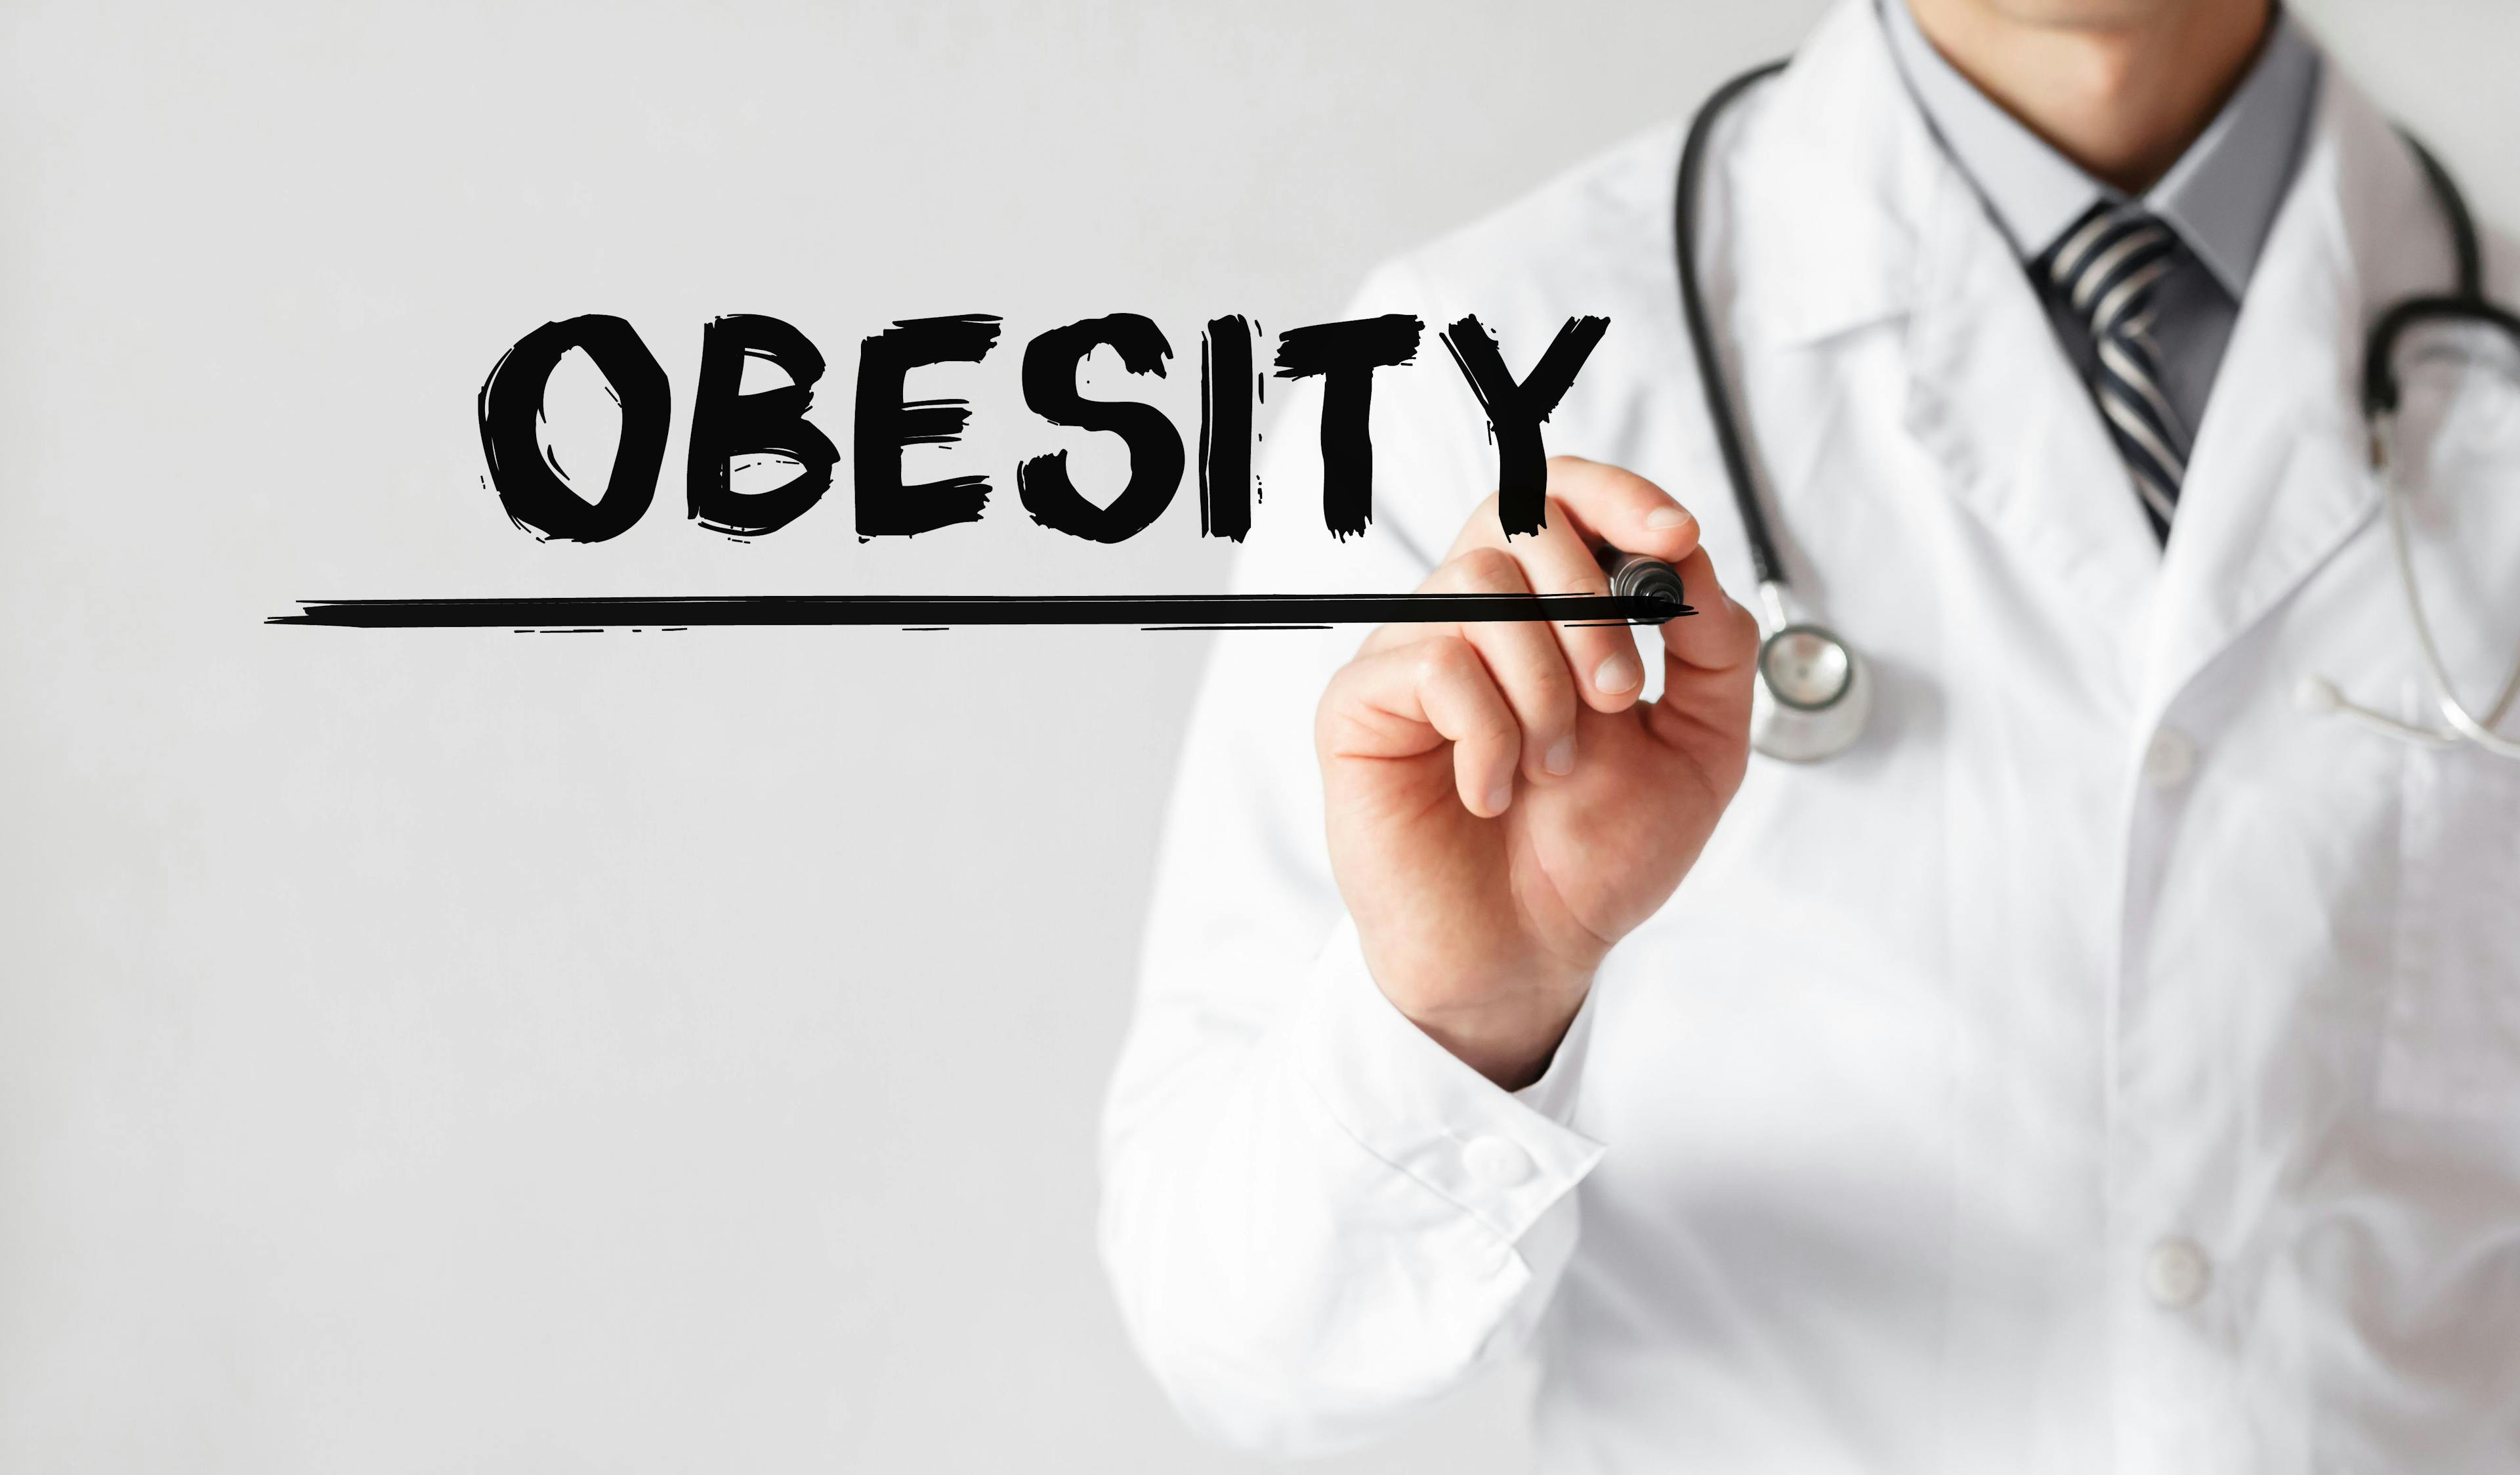 Diet and exercise may be a losing strategy for obesity